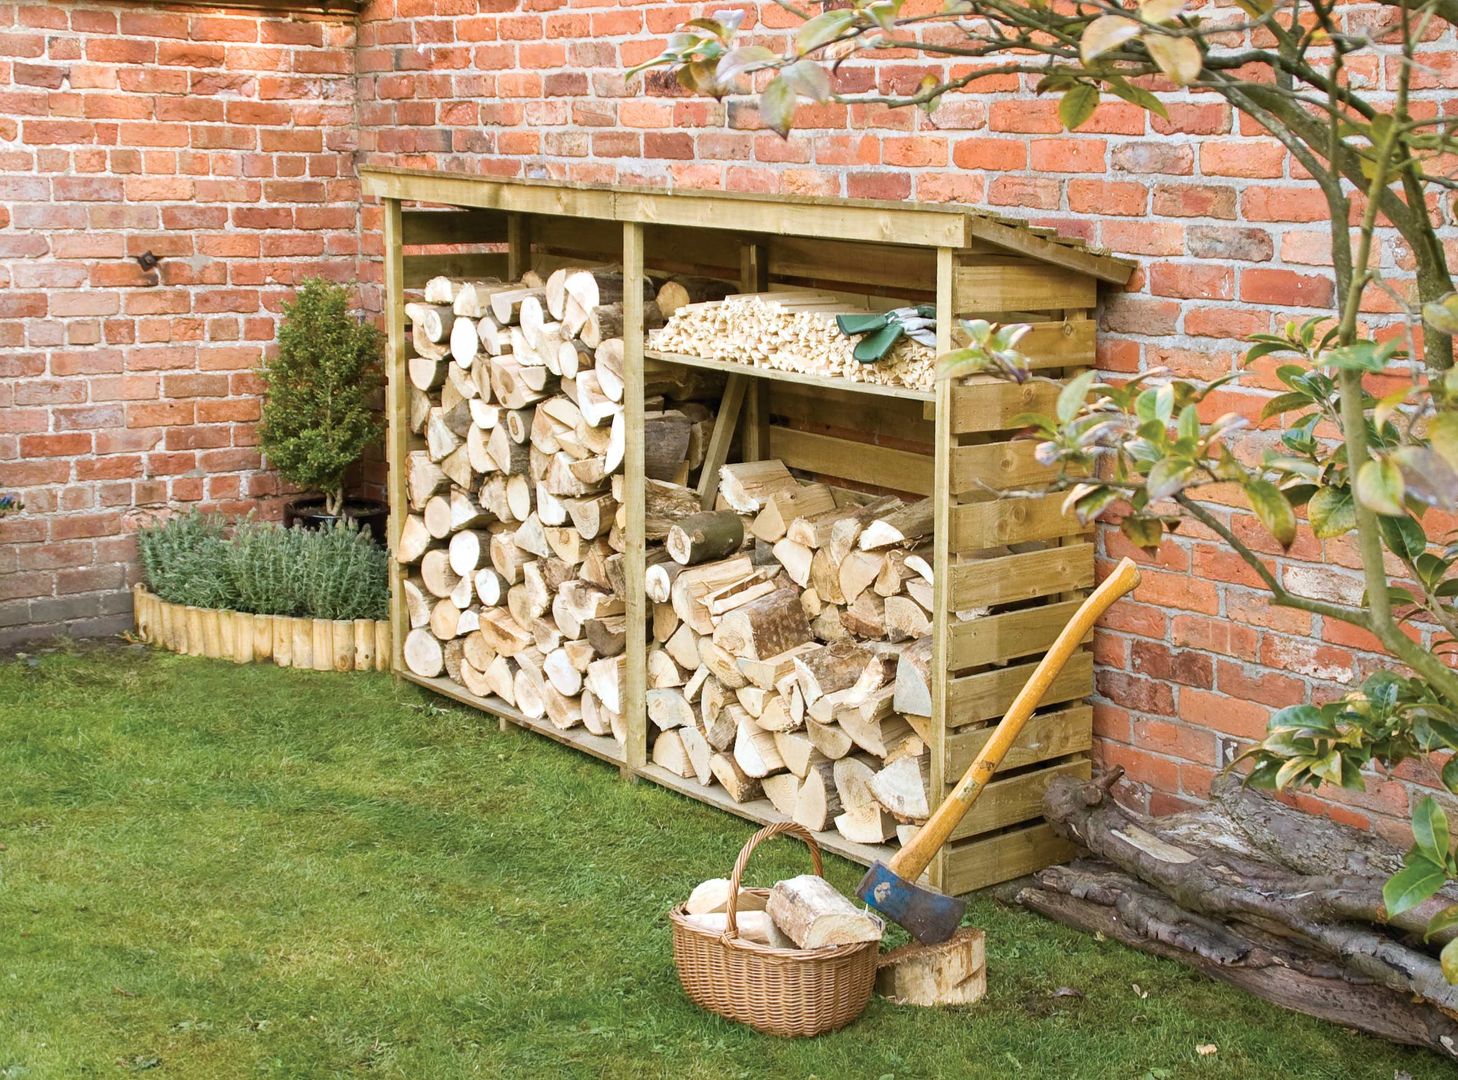 Landscaping and Garden Storage, Heritage Gardens UK Online Garden Centre Heritage Gardens UK Online Garden Centre Classic style garden Furniture